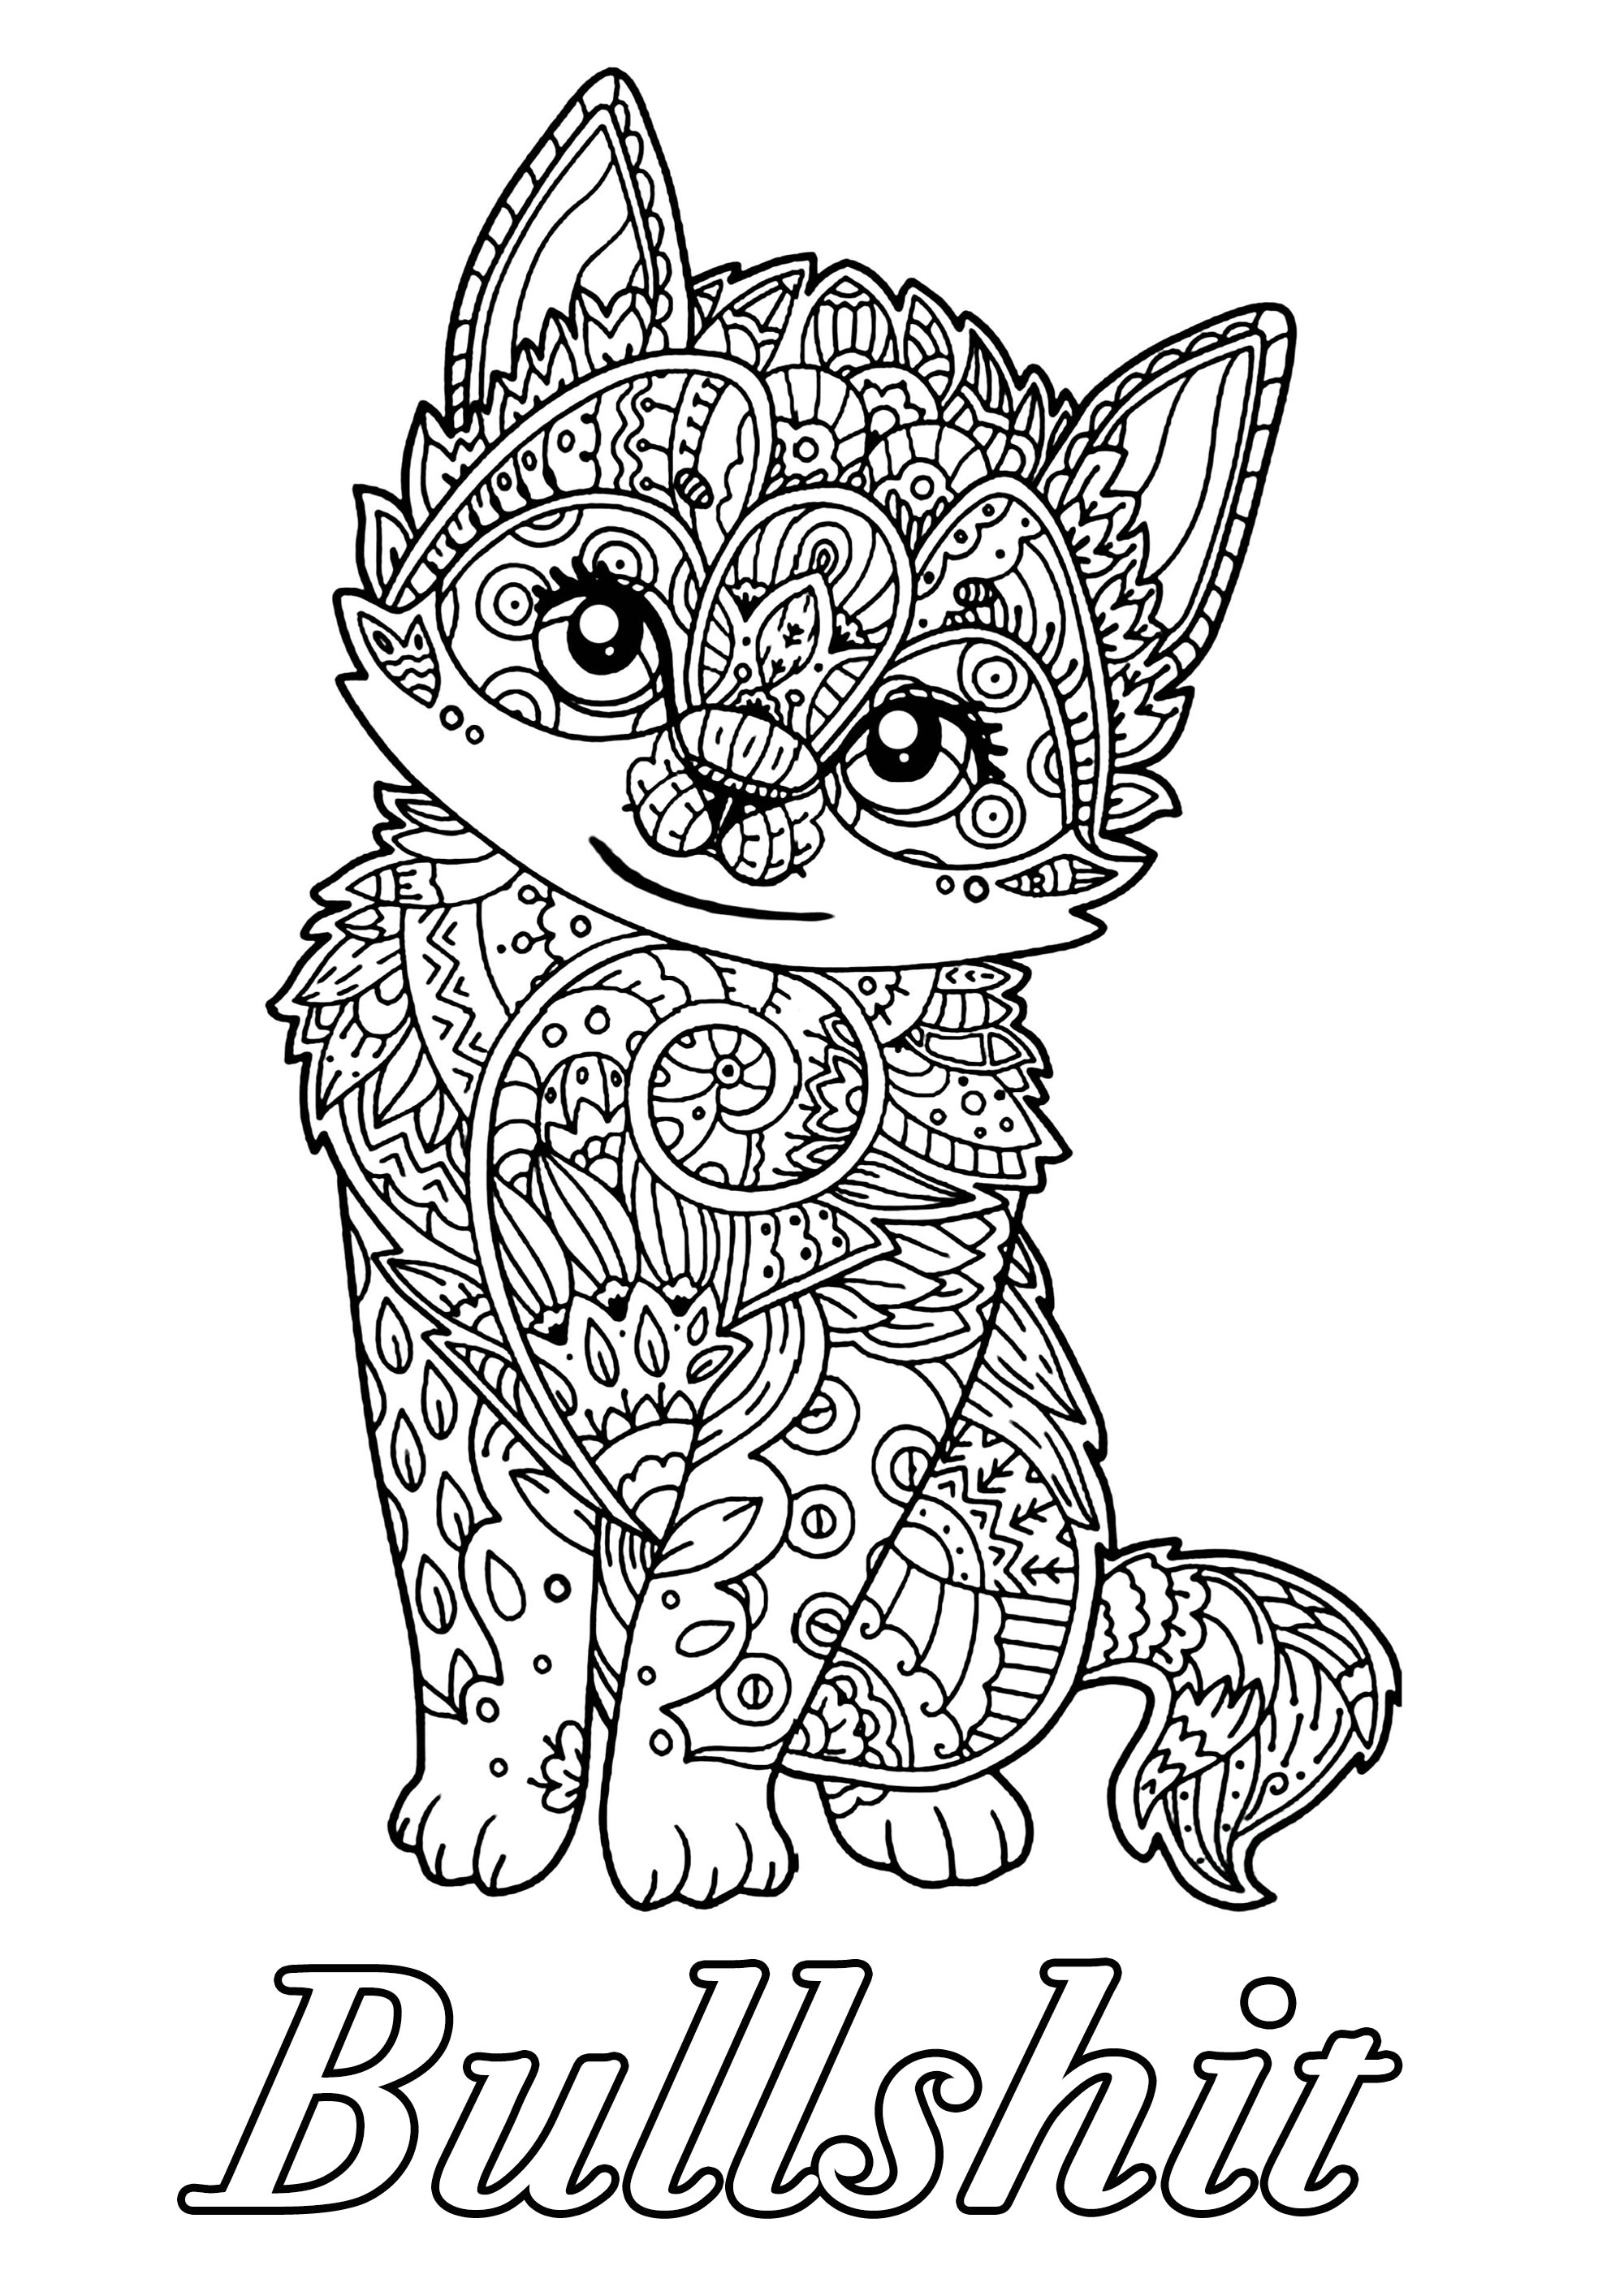 Bullshit : Swear word coloring page with cute kitten